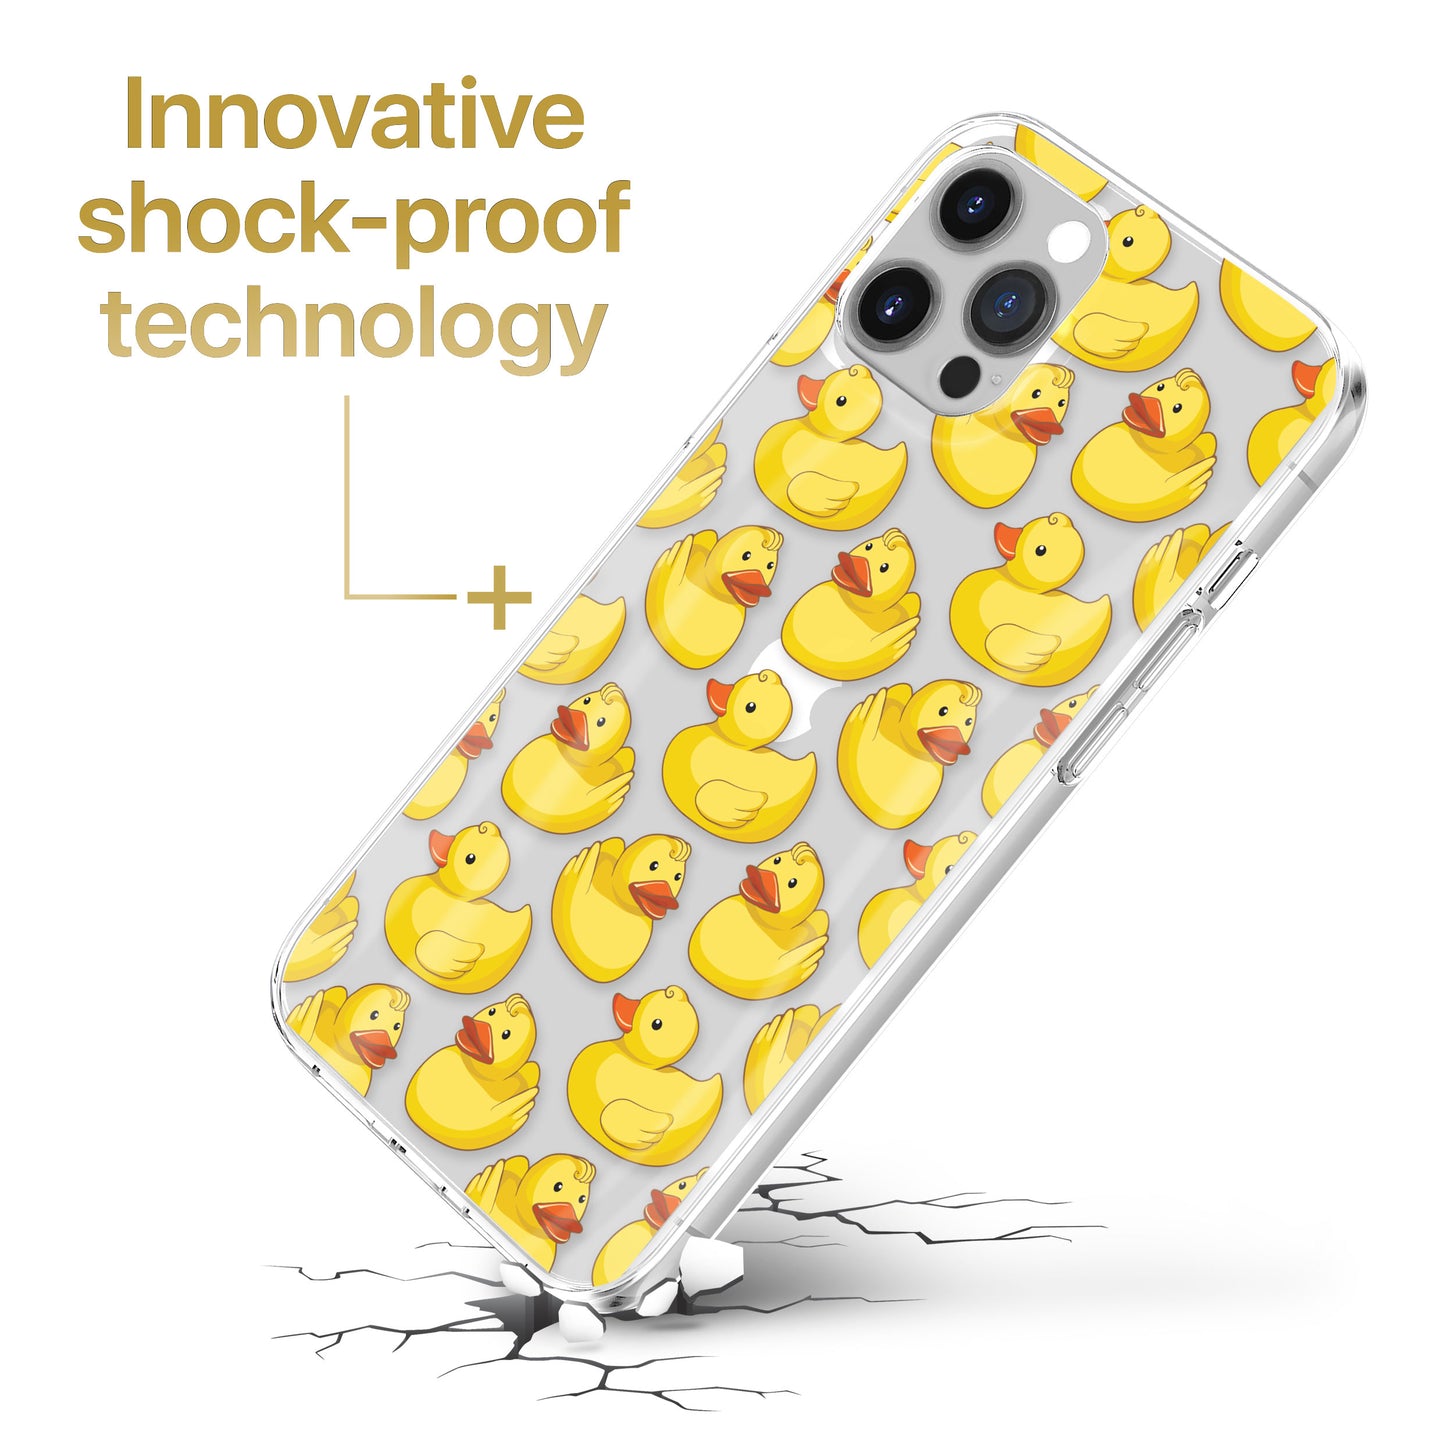 TPU Clear case with (Ducky Pattern) Design for iPhone & Samsung Phones